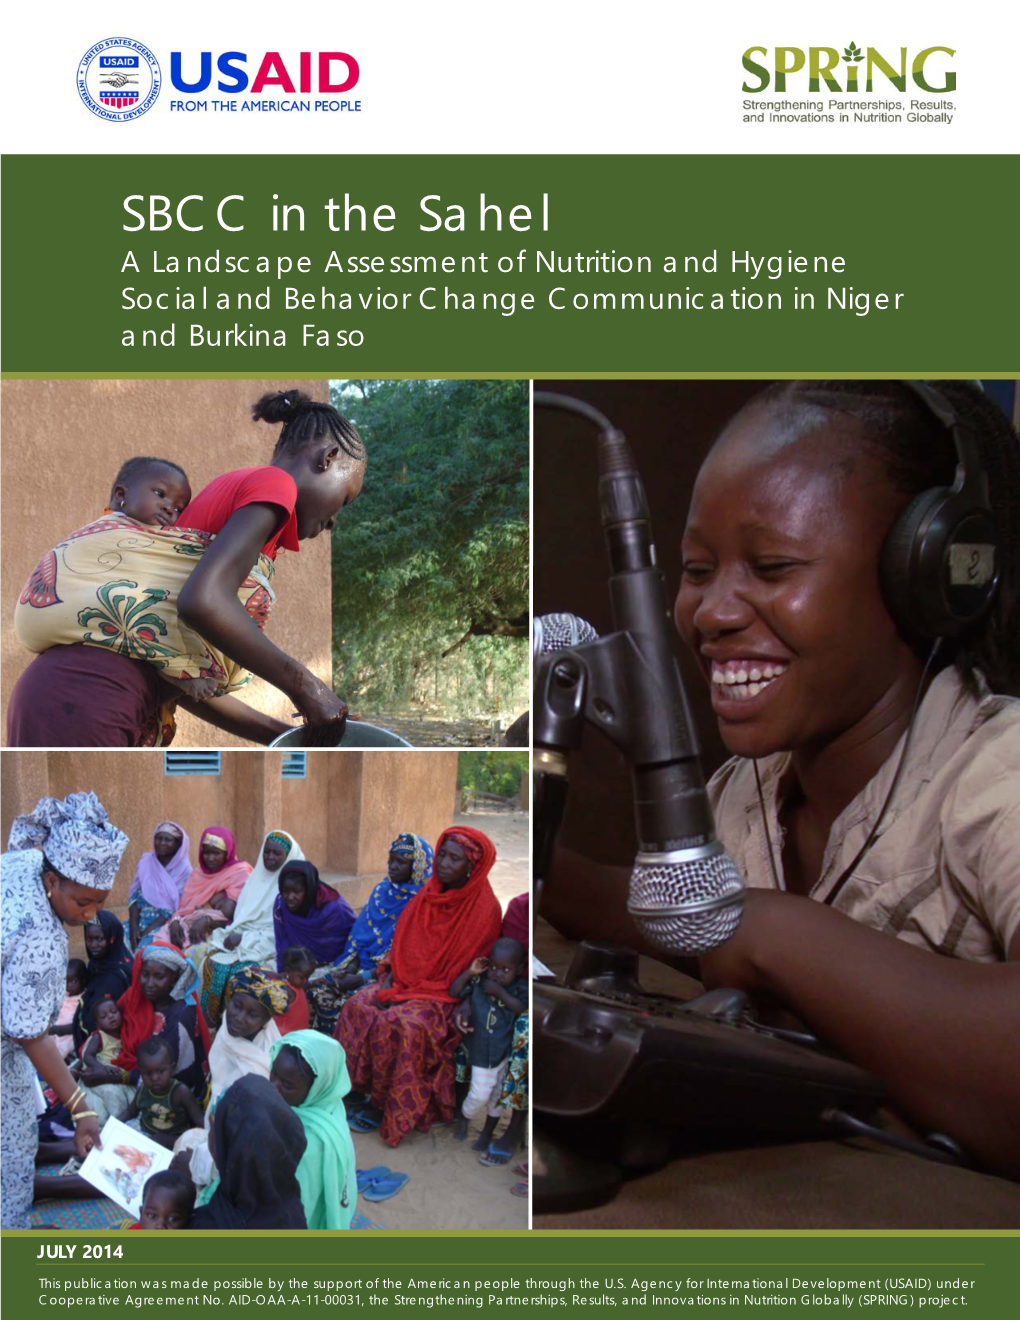 SBCC in the Sahel a Landscape Assessment of Nutrition and Hygiene Social and Behavior Change Communication in Niger and Burkina Faso